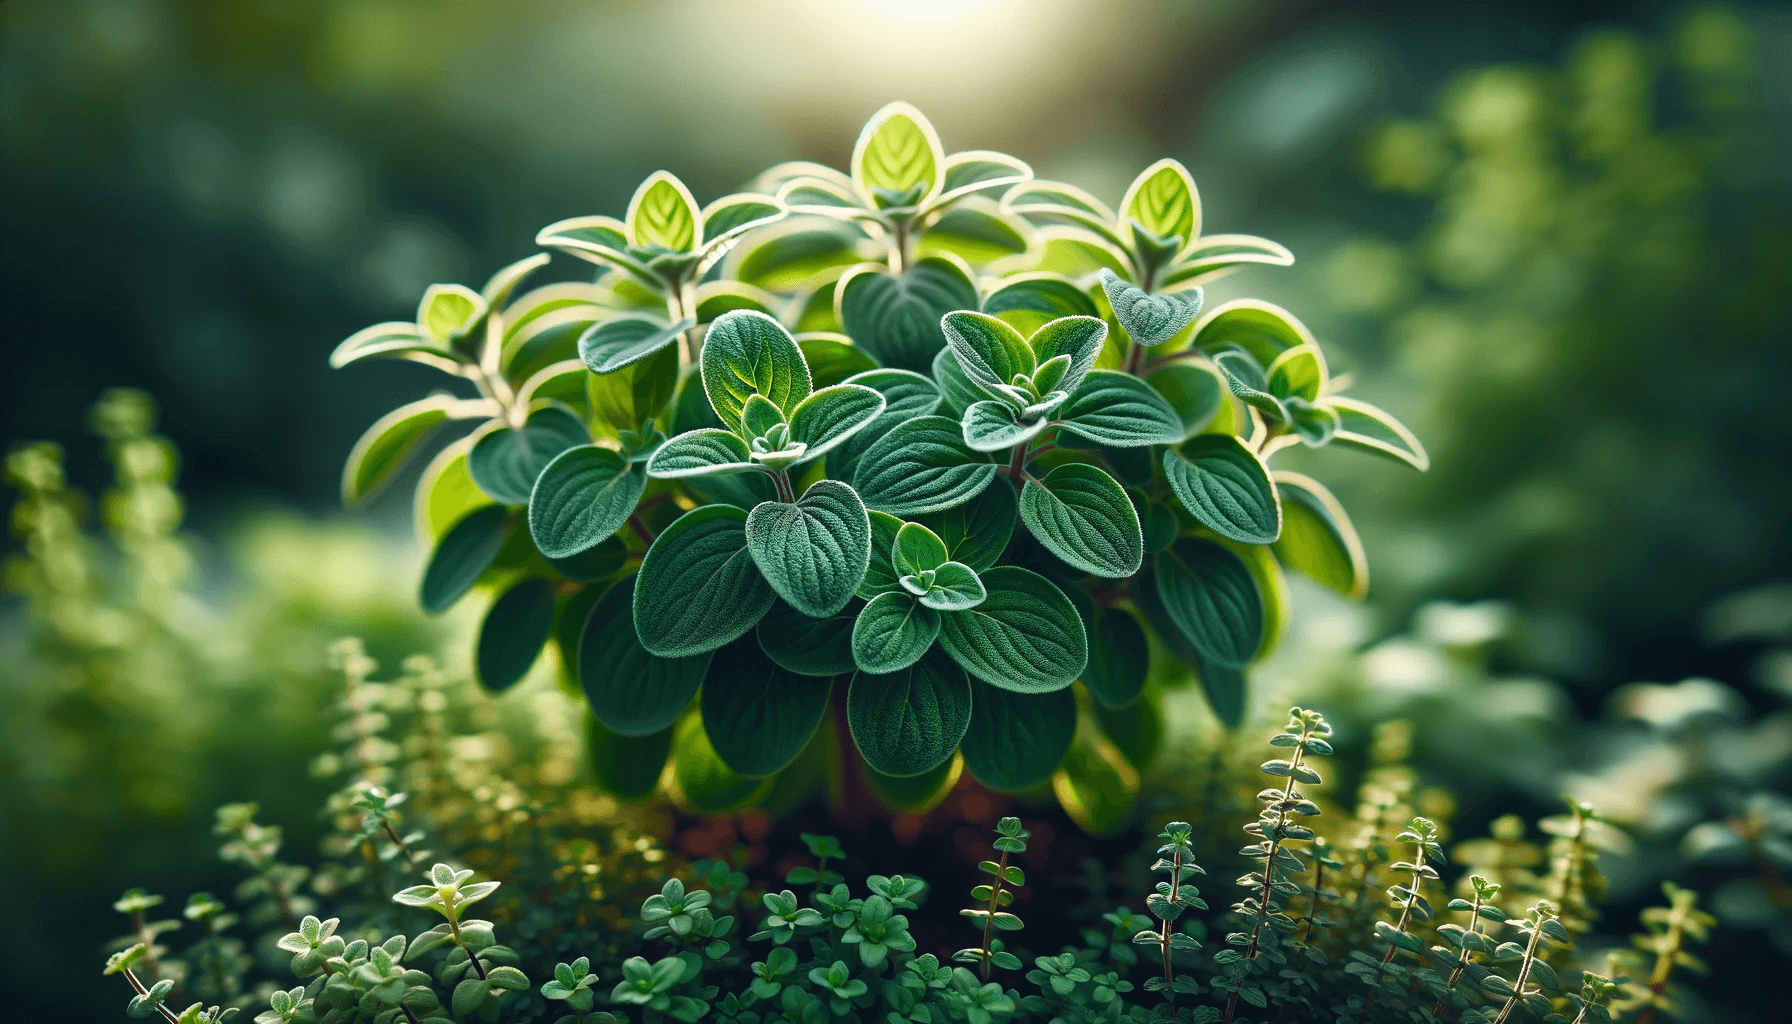 Oregano plant with vibrant green leaves